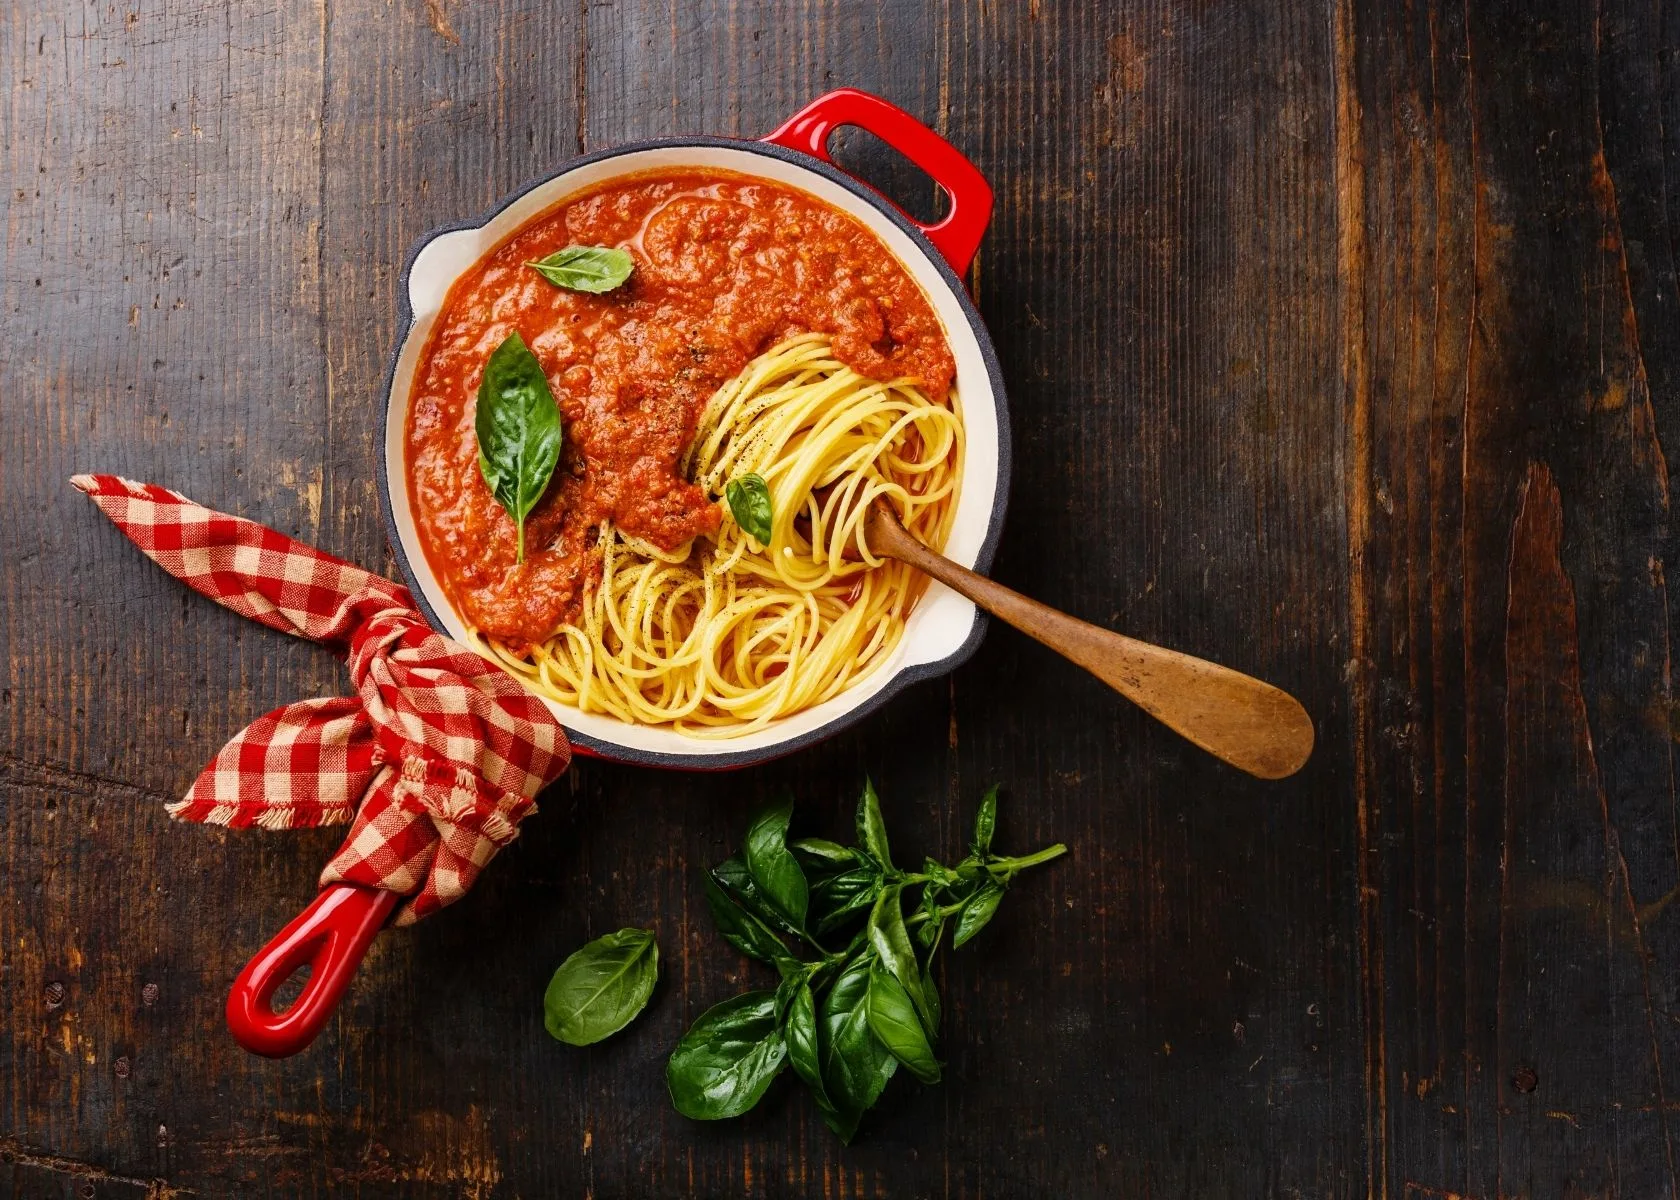 Small pot with spaghetti and pasta sauce on table with fresh basil leaves.